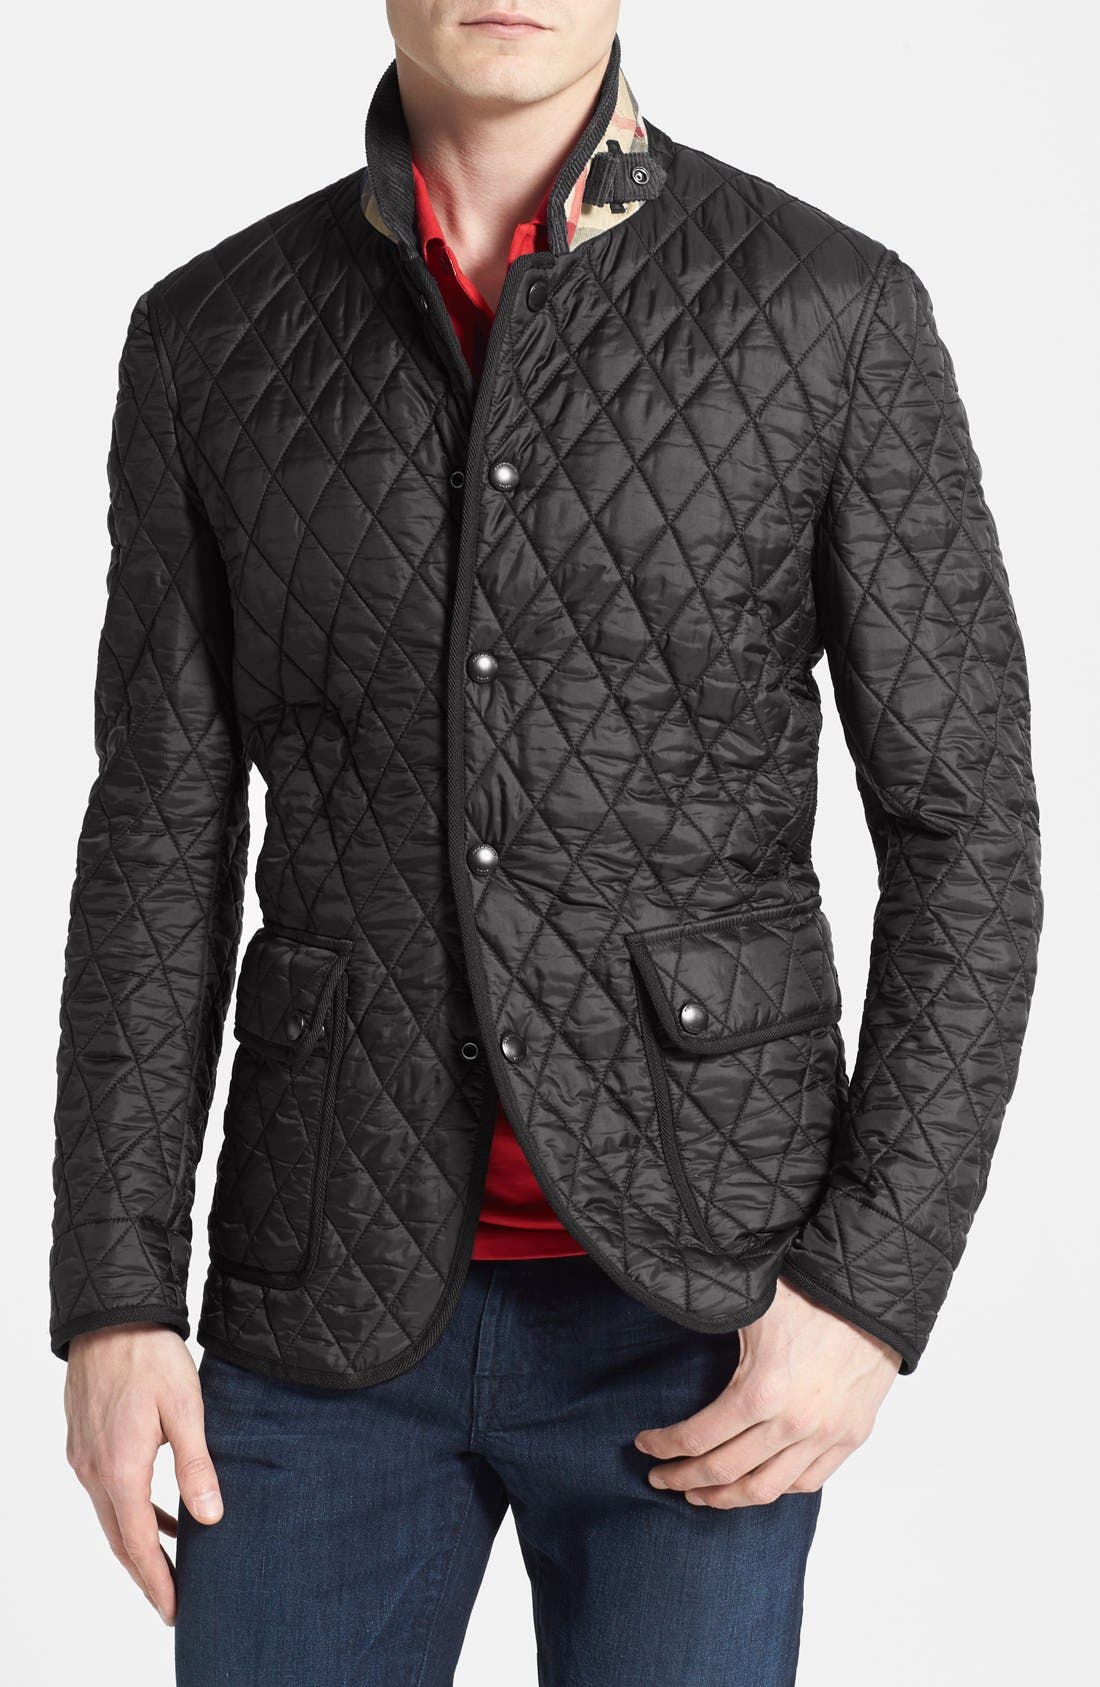 Burberry Brit 'Rendell' Diamond Quilted 